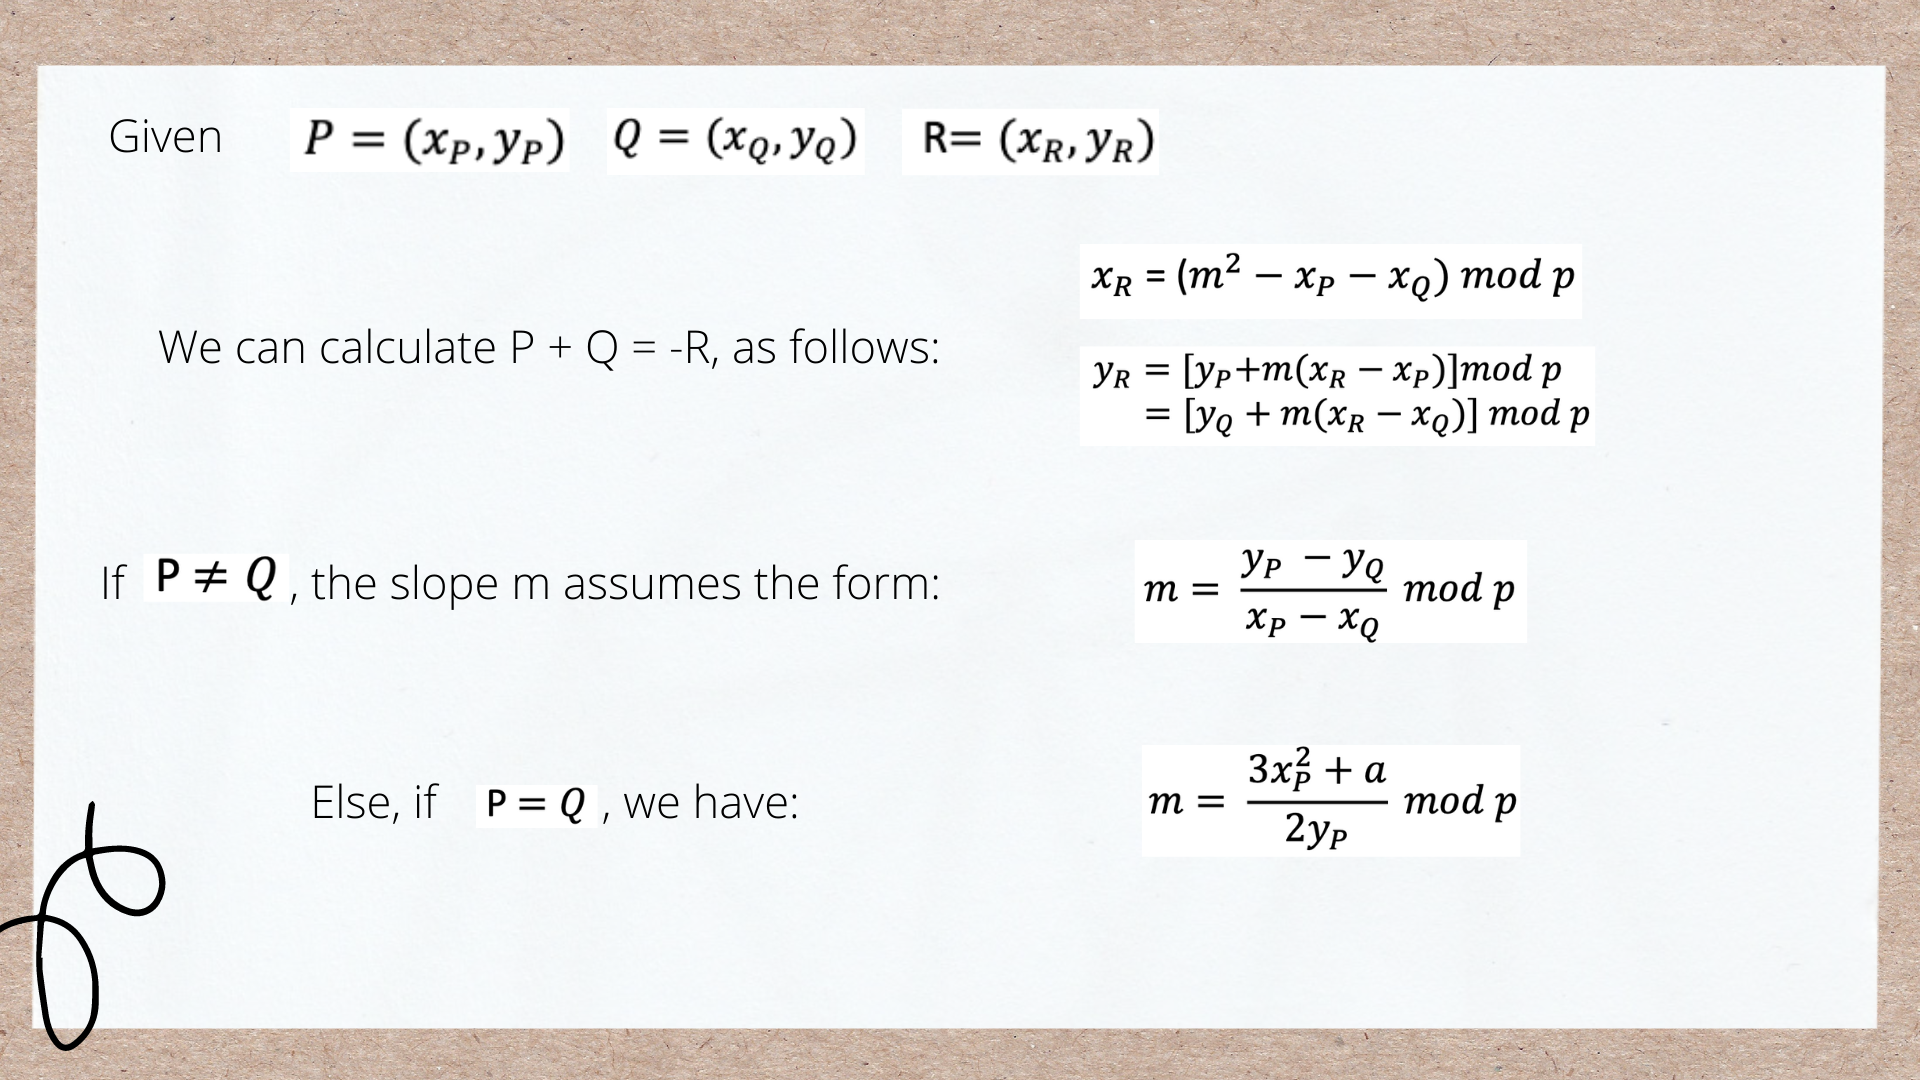 Equations for calculating point additions